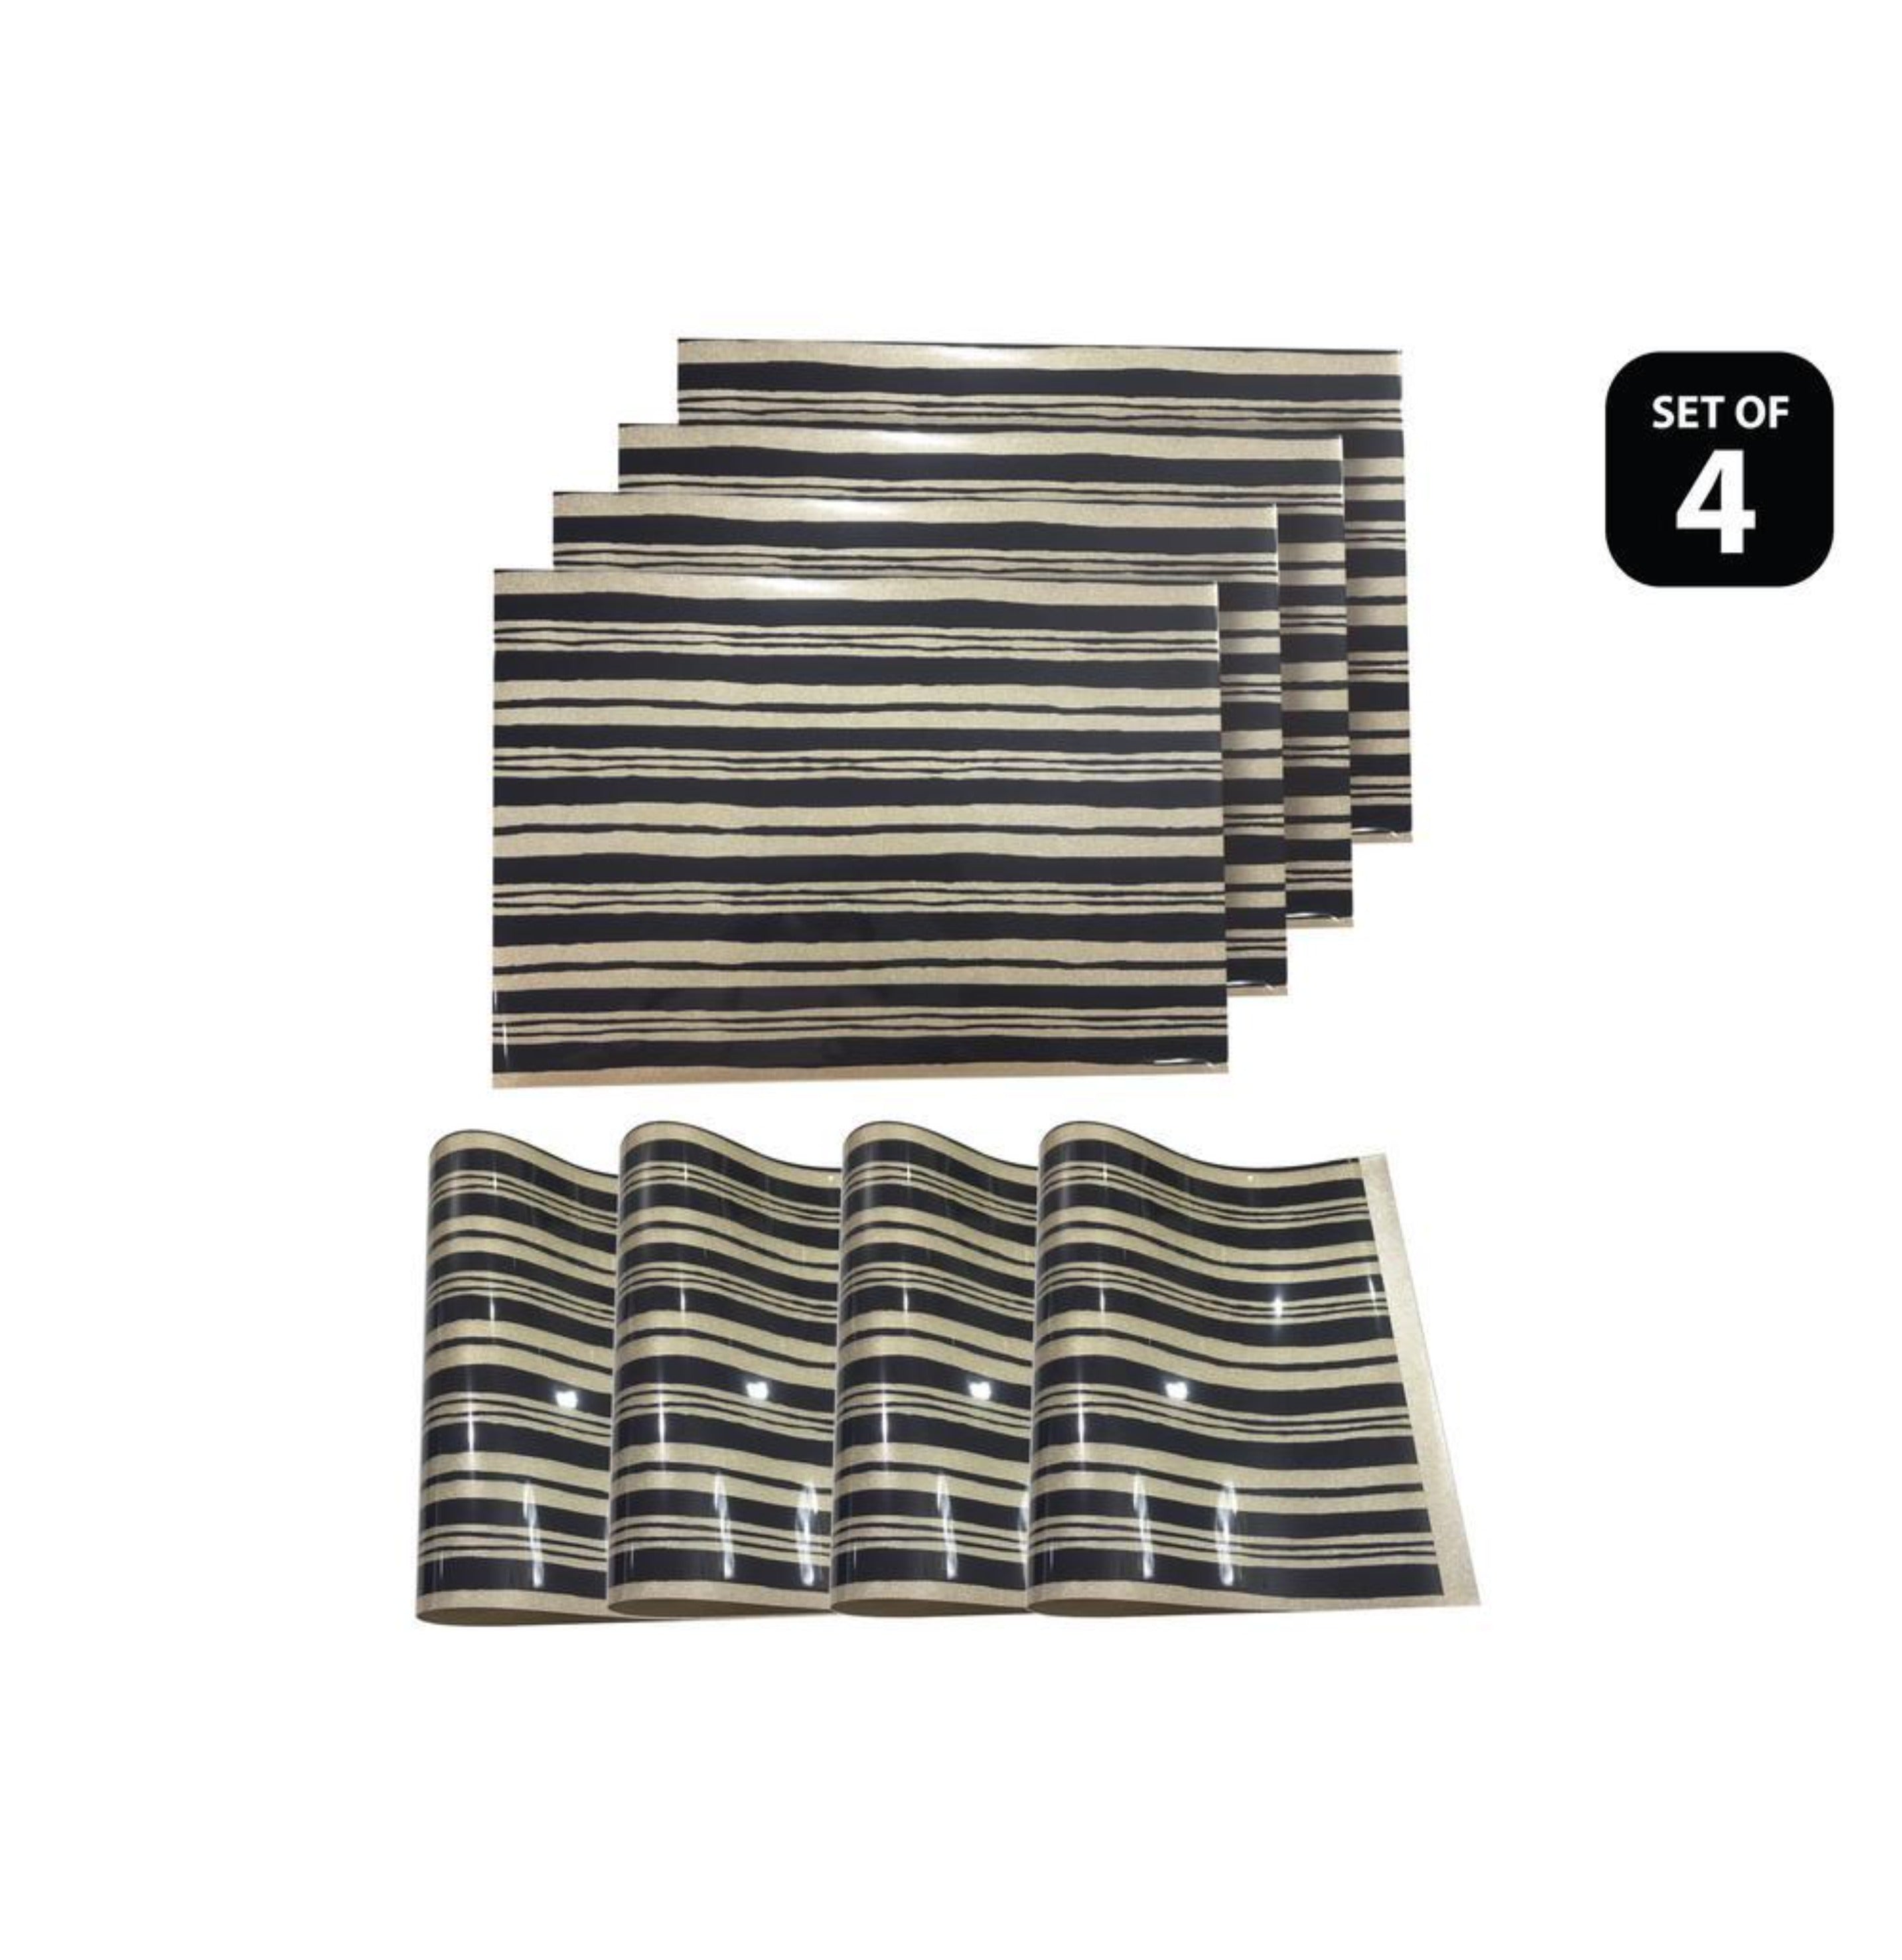 Dainty Home Jagged Black Reversible Metallic Printed Placemats (Set of 4)